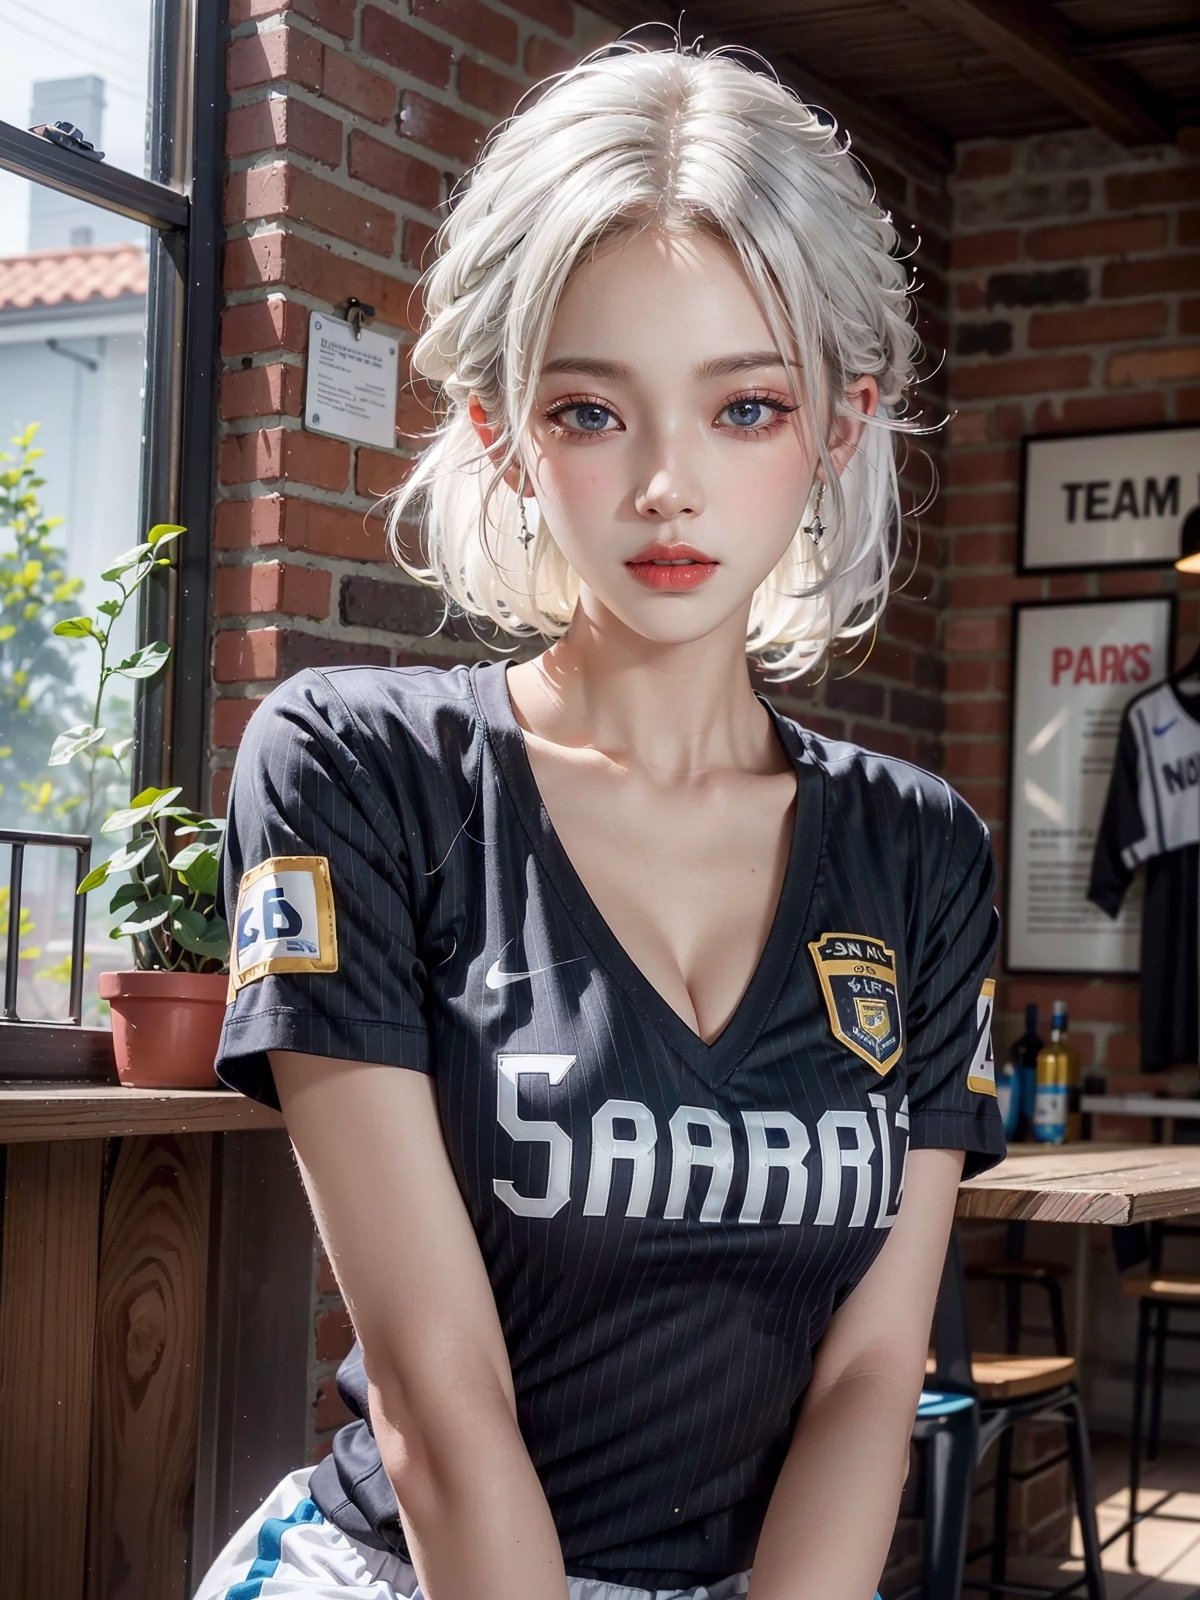 American, white hair, blue eyes, beautiful 1women, ((from san diego)), california, wearing sports uniform,team name in golden written on shirt,masterpiece,highly detailed,Colorful portraits,sexy,seducing,leaning,medium breast,cleavage